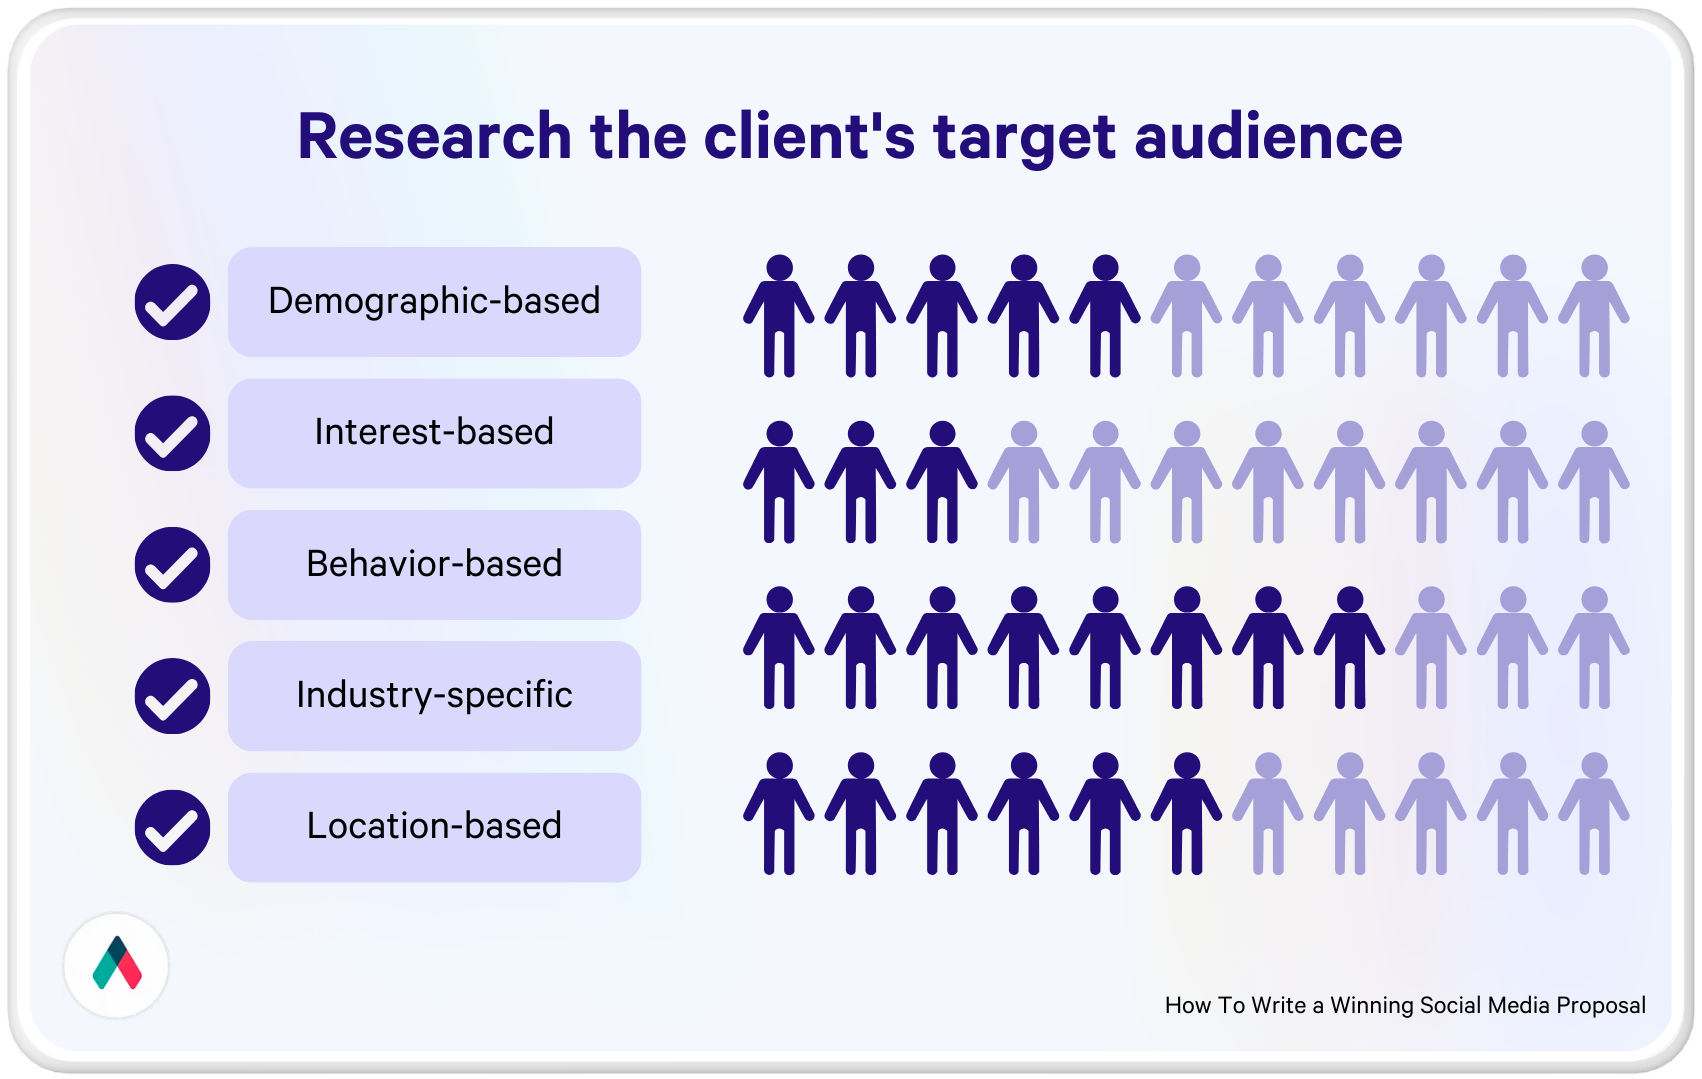 a diagram showing how to research the client's target audience